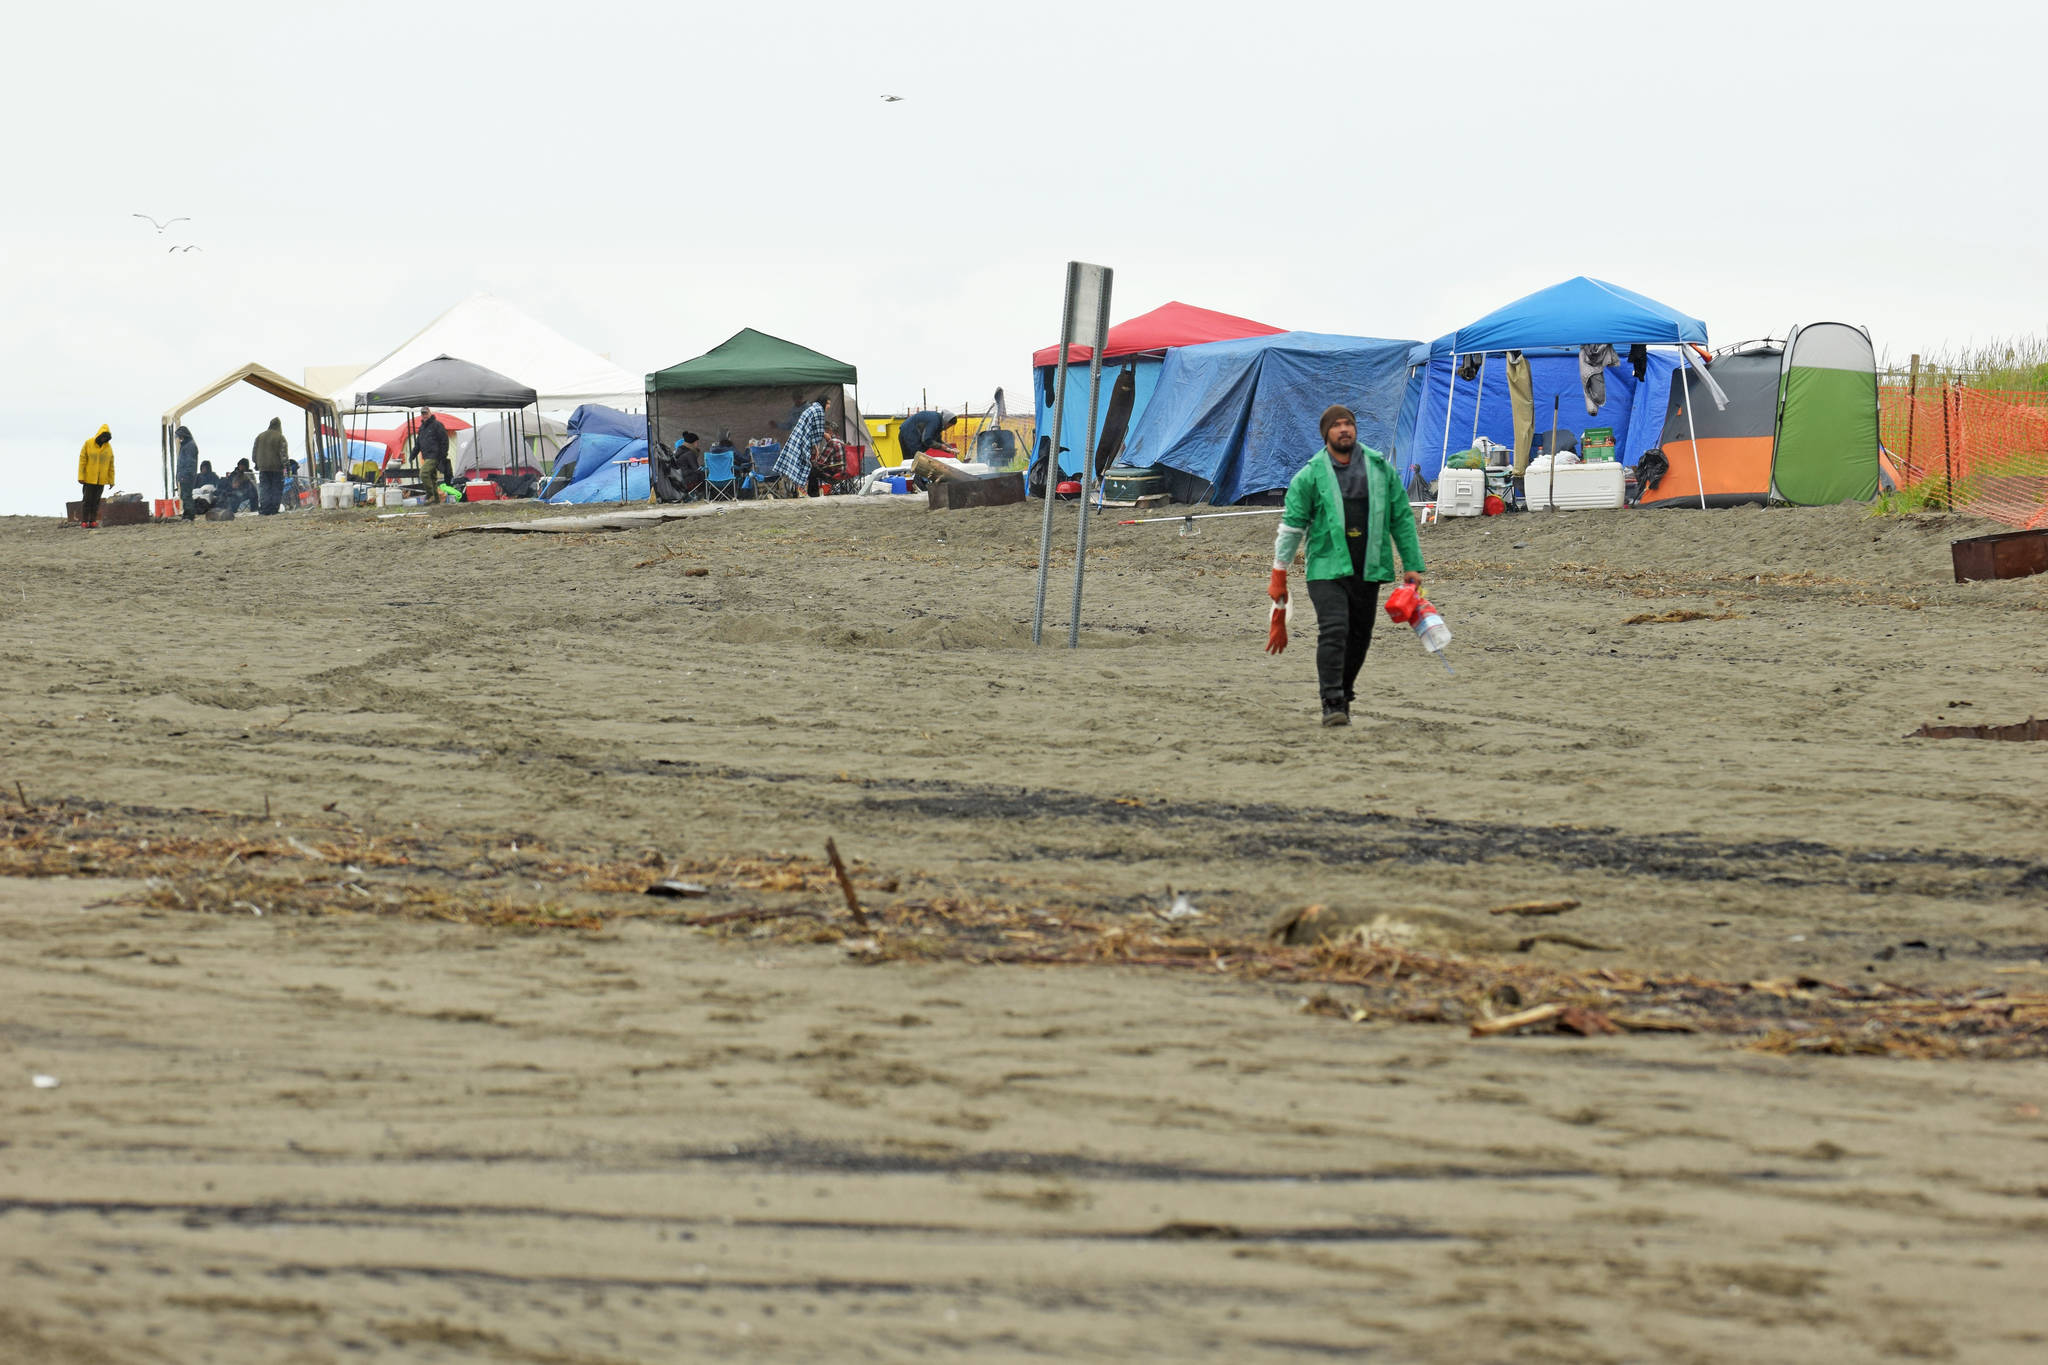 Tents stand on Kenai Beach on Tuesday, July 10, 2018, during the first day of the dipnetting season. Alaskans from around the state travel to Kenai to participate in the three-week season, which allows residents to harvest salmon and flounder for personal use. (Photo by Erin Thompson/Peninsula Clarion)